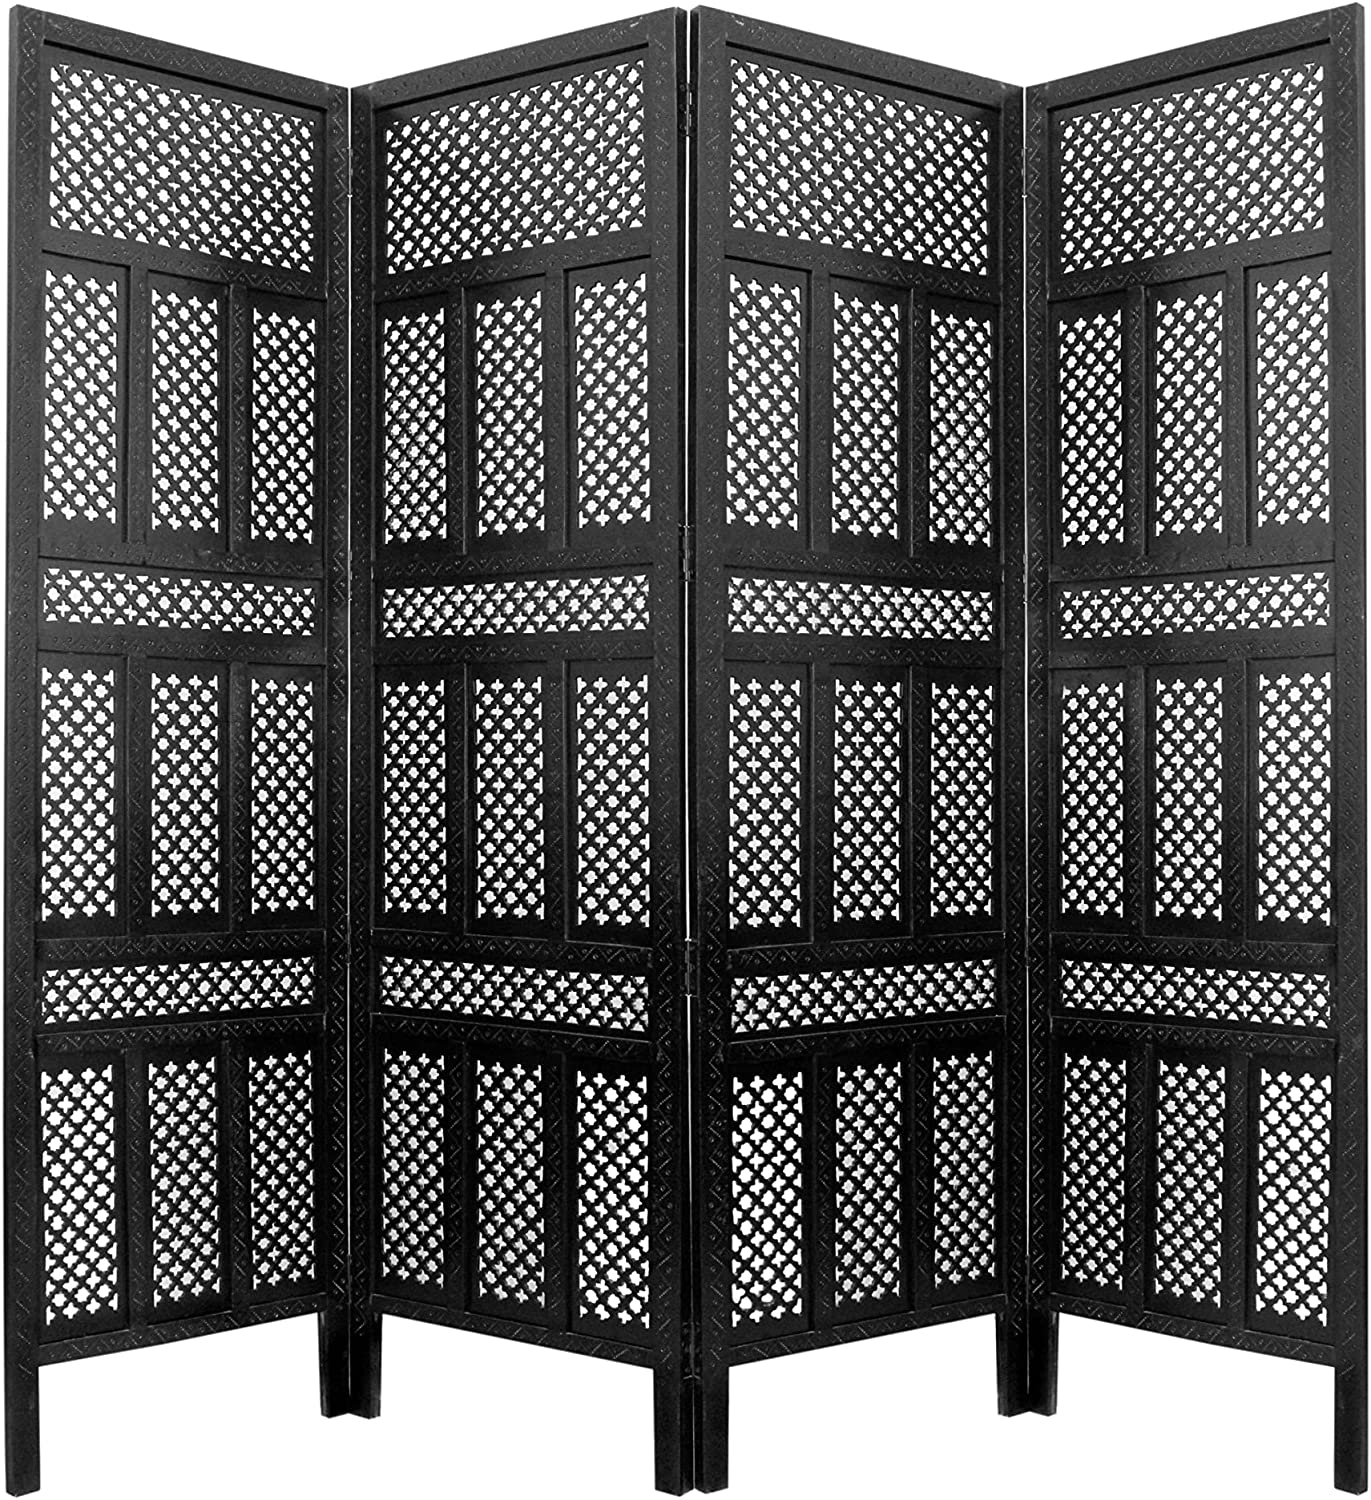 Wooden Handcrafted Wooden Partition, Room Divider Separator for Living Room | Office Wooden Partition Screen Room Divider Wood Partitions for Home Kitchen & Office Online in Bangalore, Mumbai